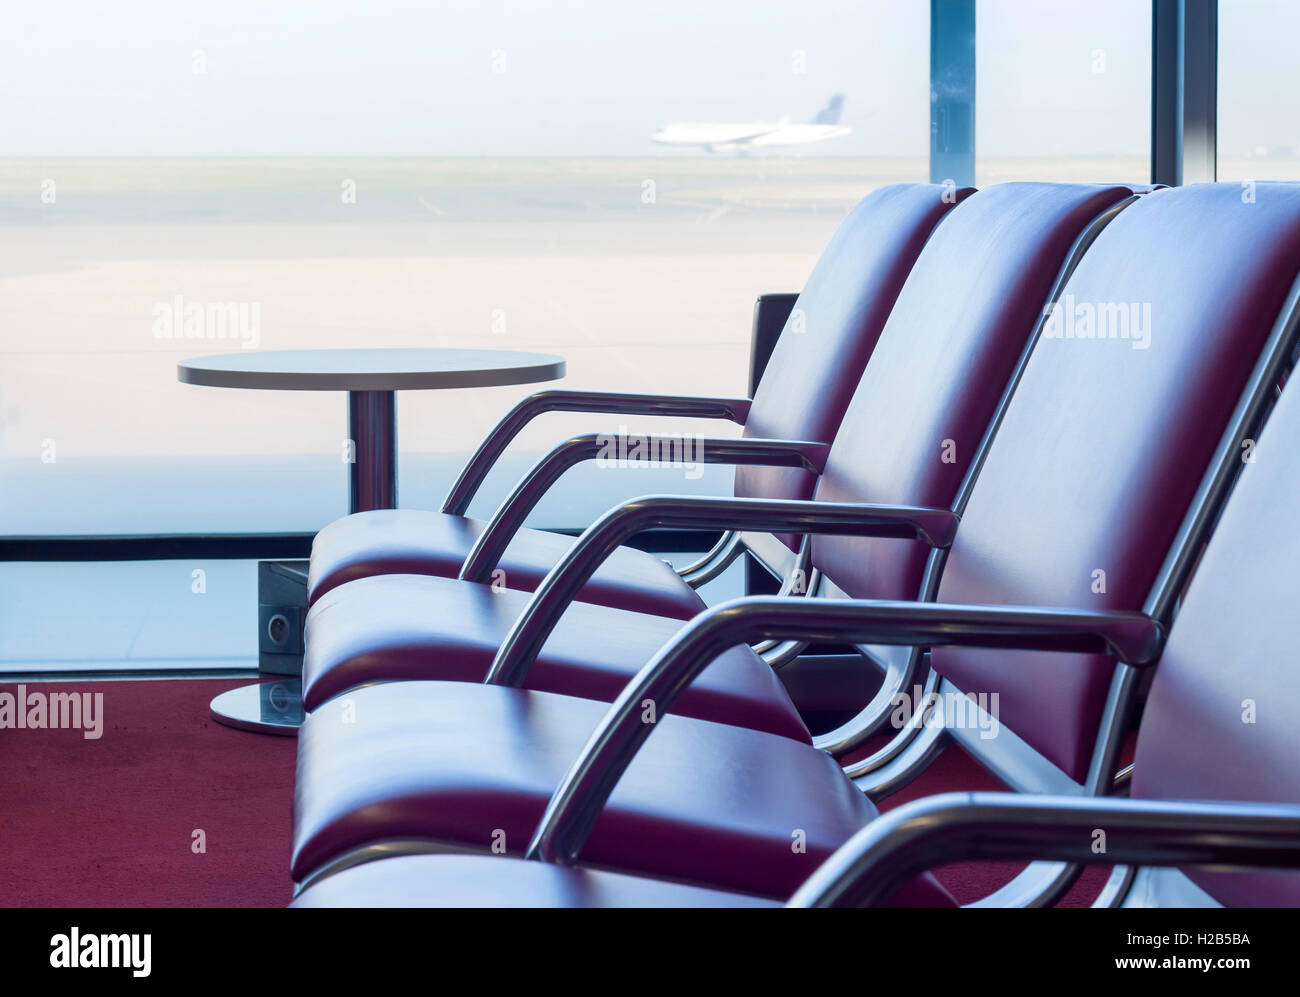 Bench in departure flights waiting hall at the airport with airplane in the background Stock Photo